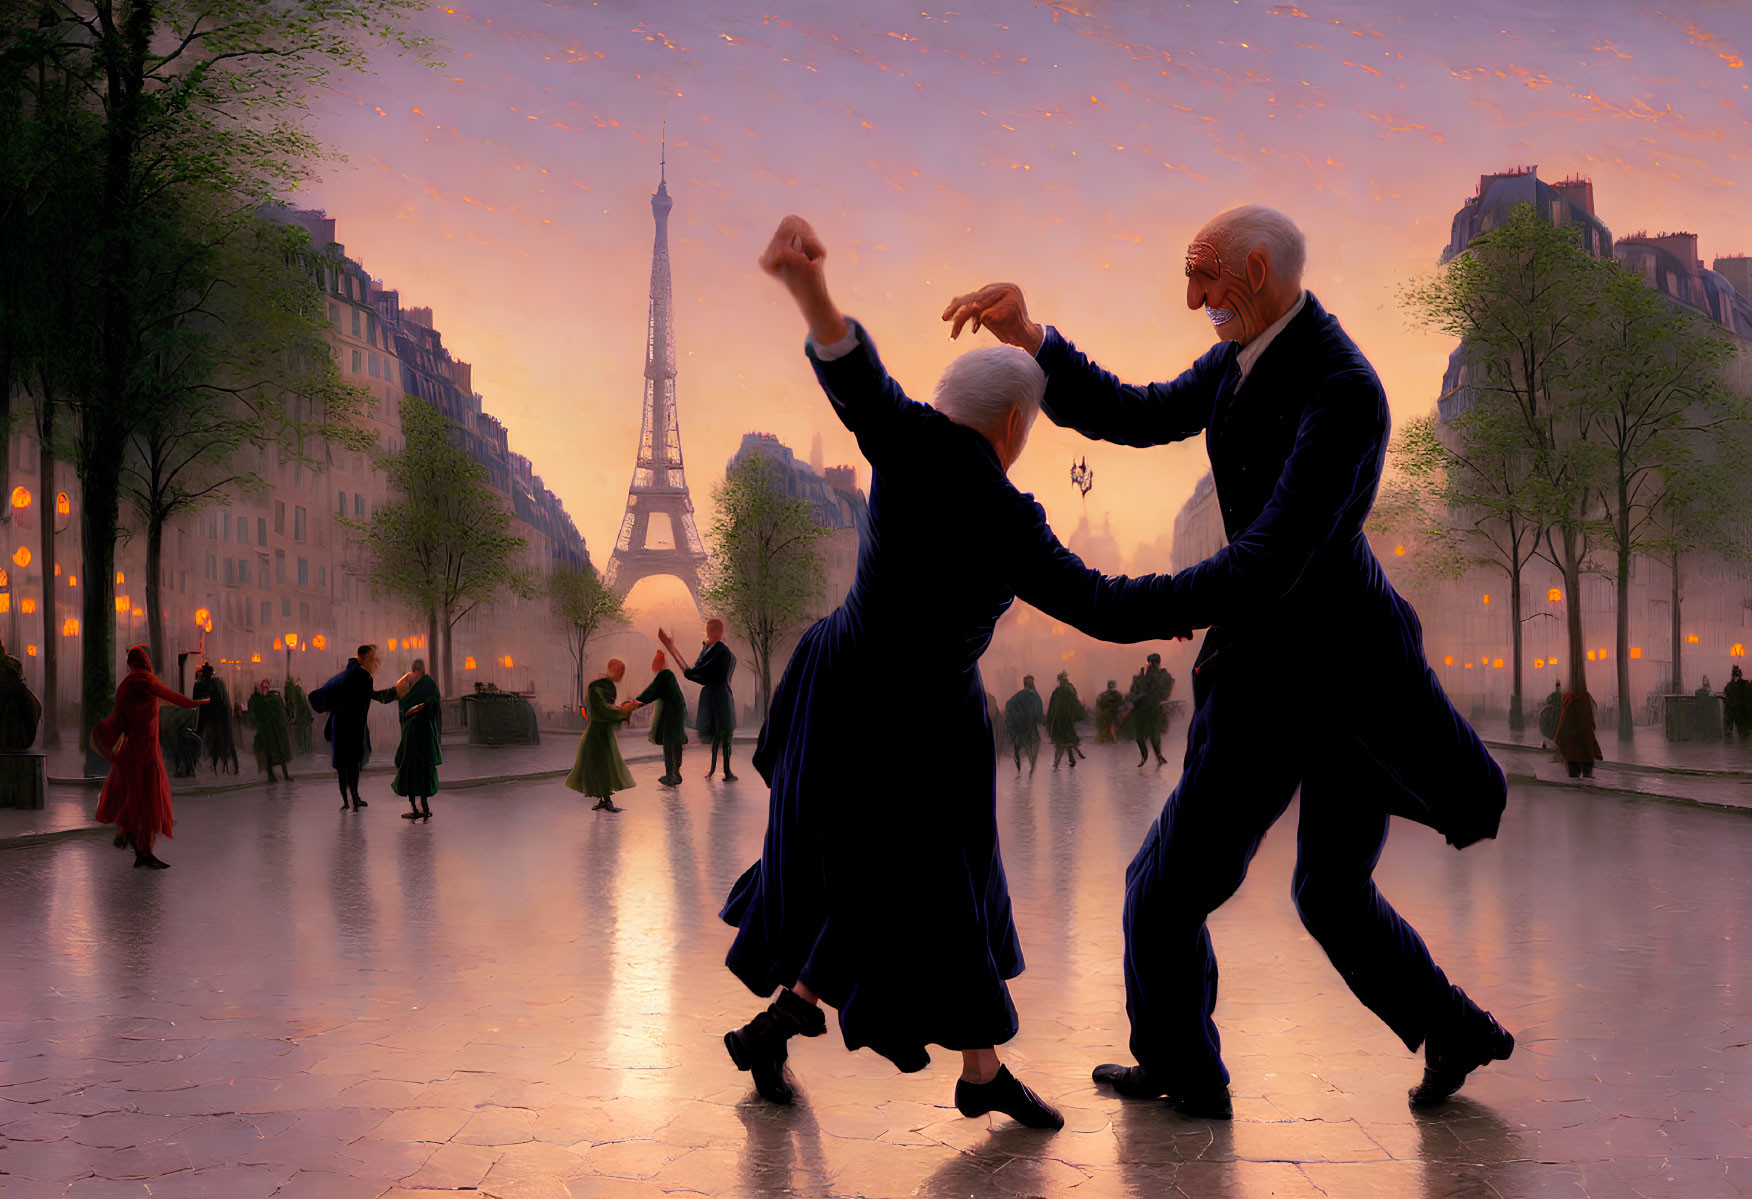 Elderly couple dancing on cobblestone plaza at dusk with Eiffel Tower in background